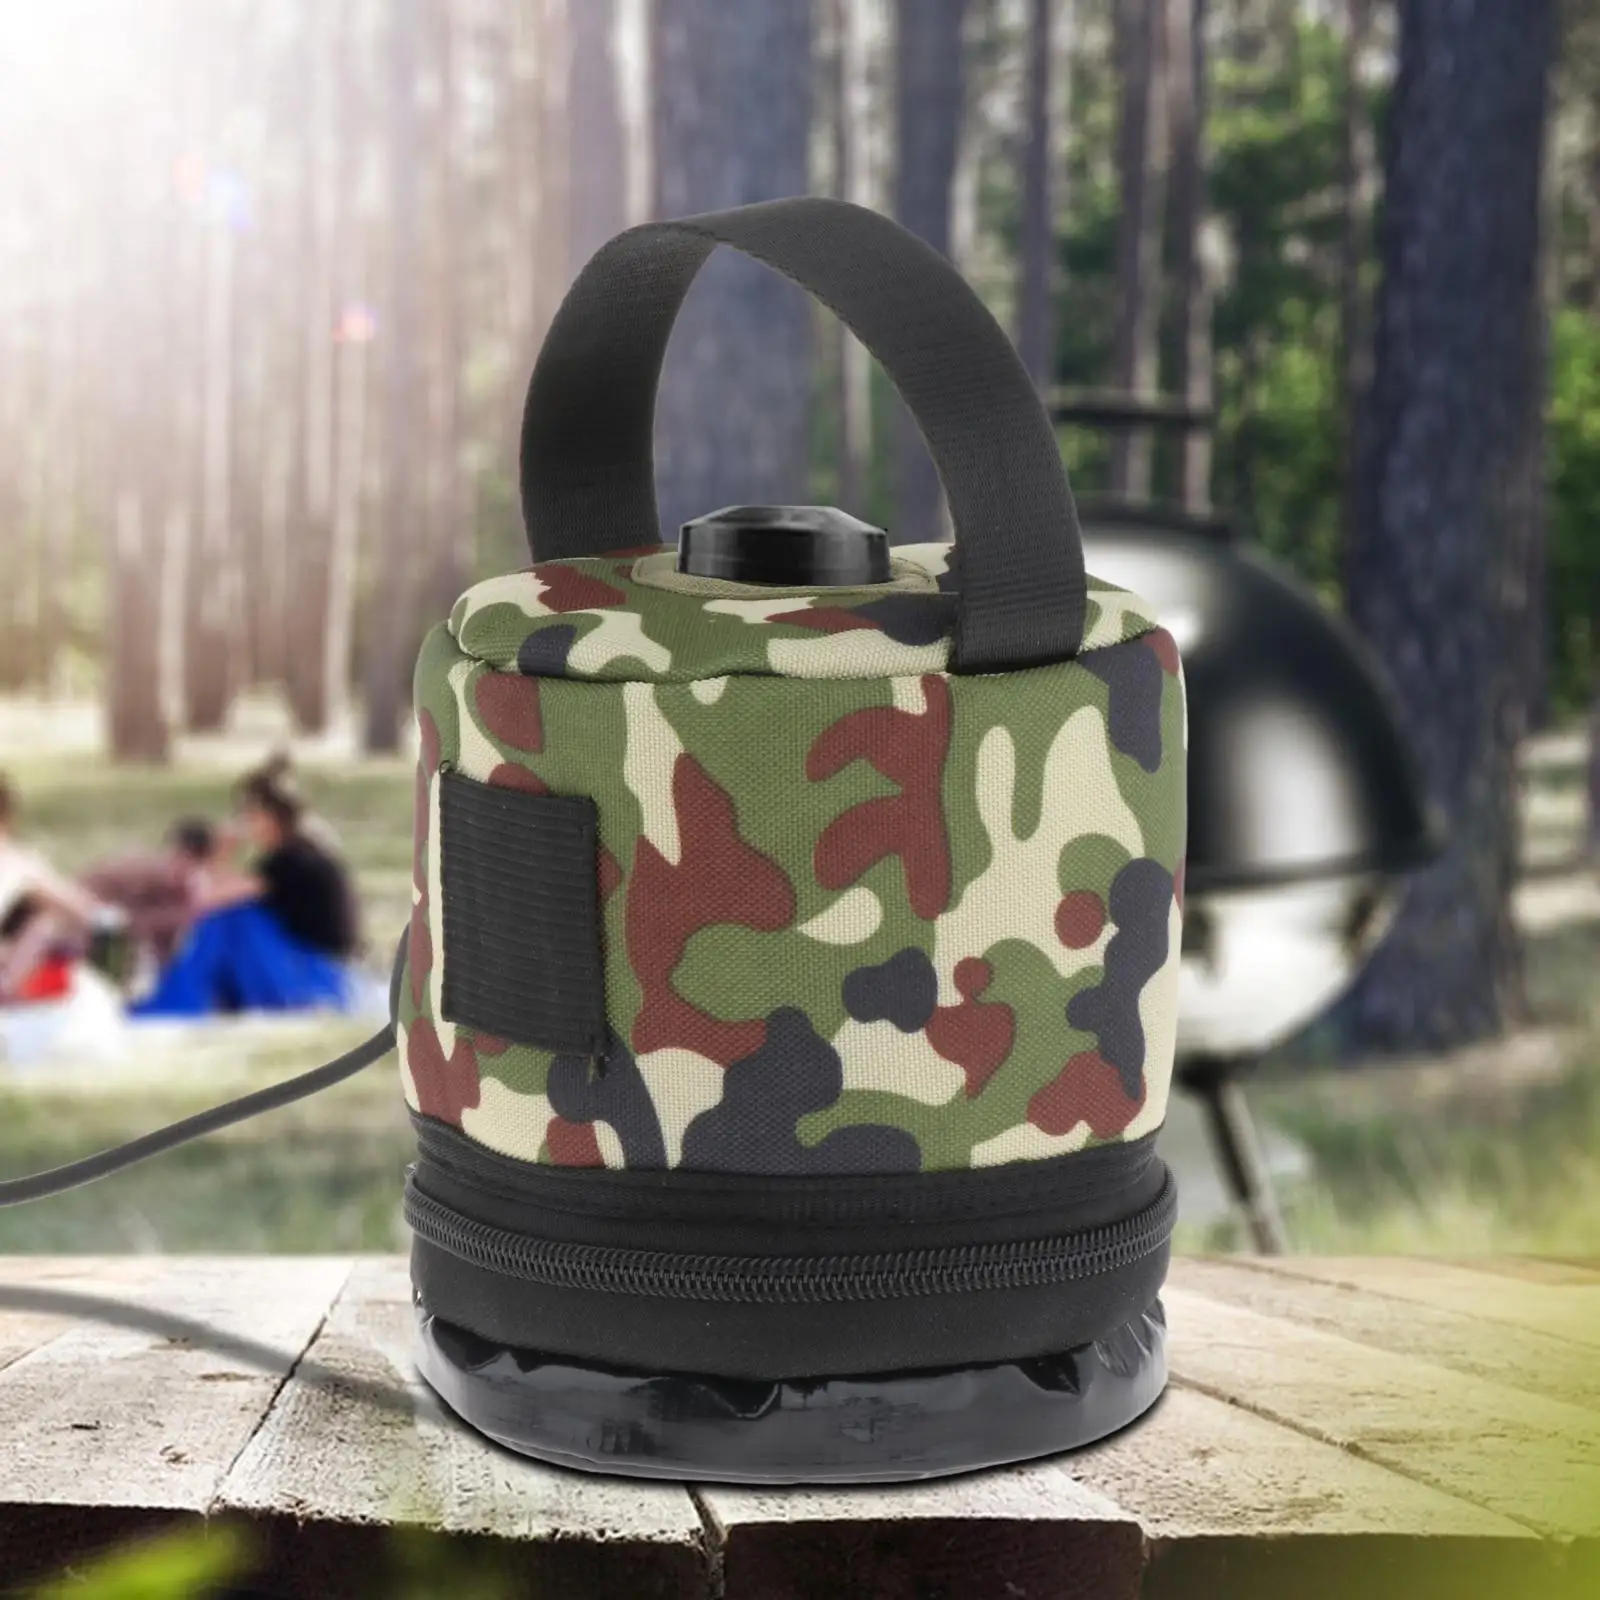 Camping Gas Canister Cover Protector Fuel Canister Protective Cover for Cooking Supplies Outdoor Traveling Accessories Hiking